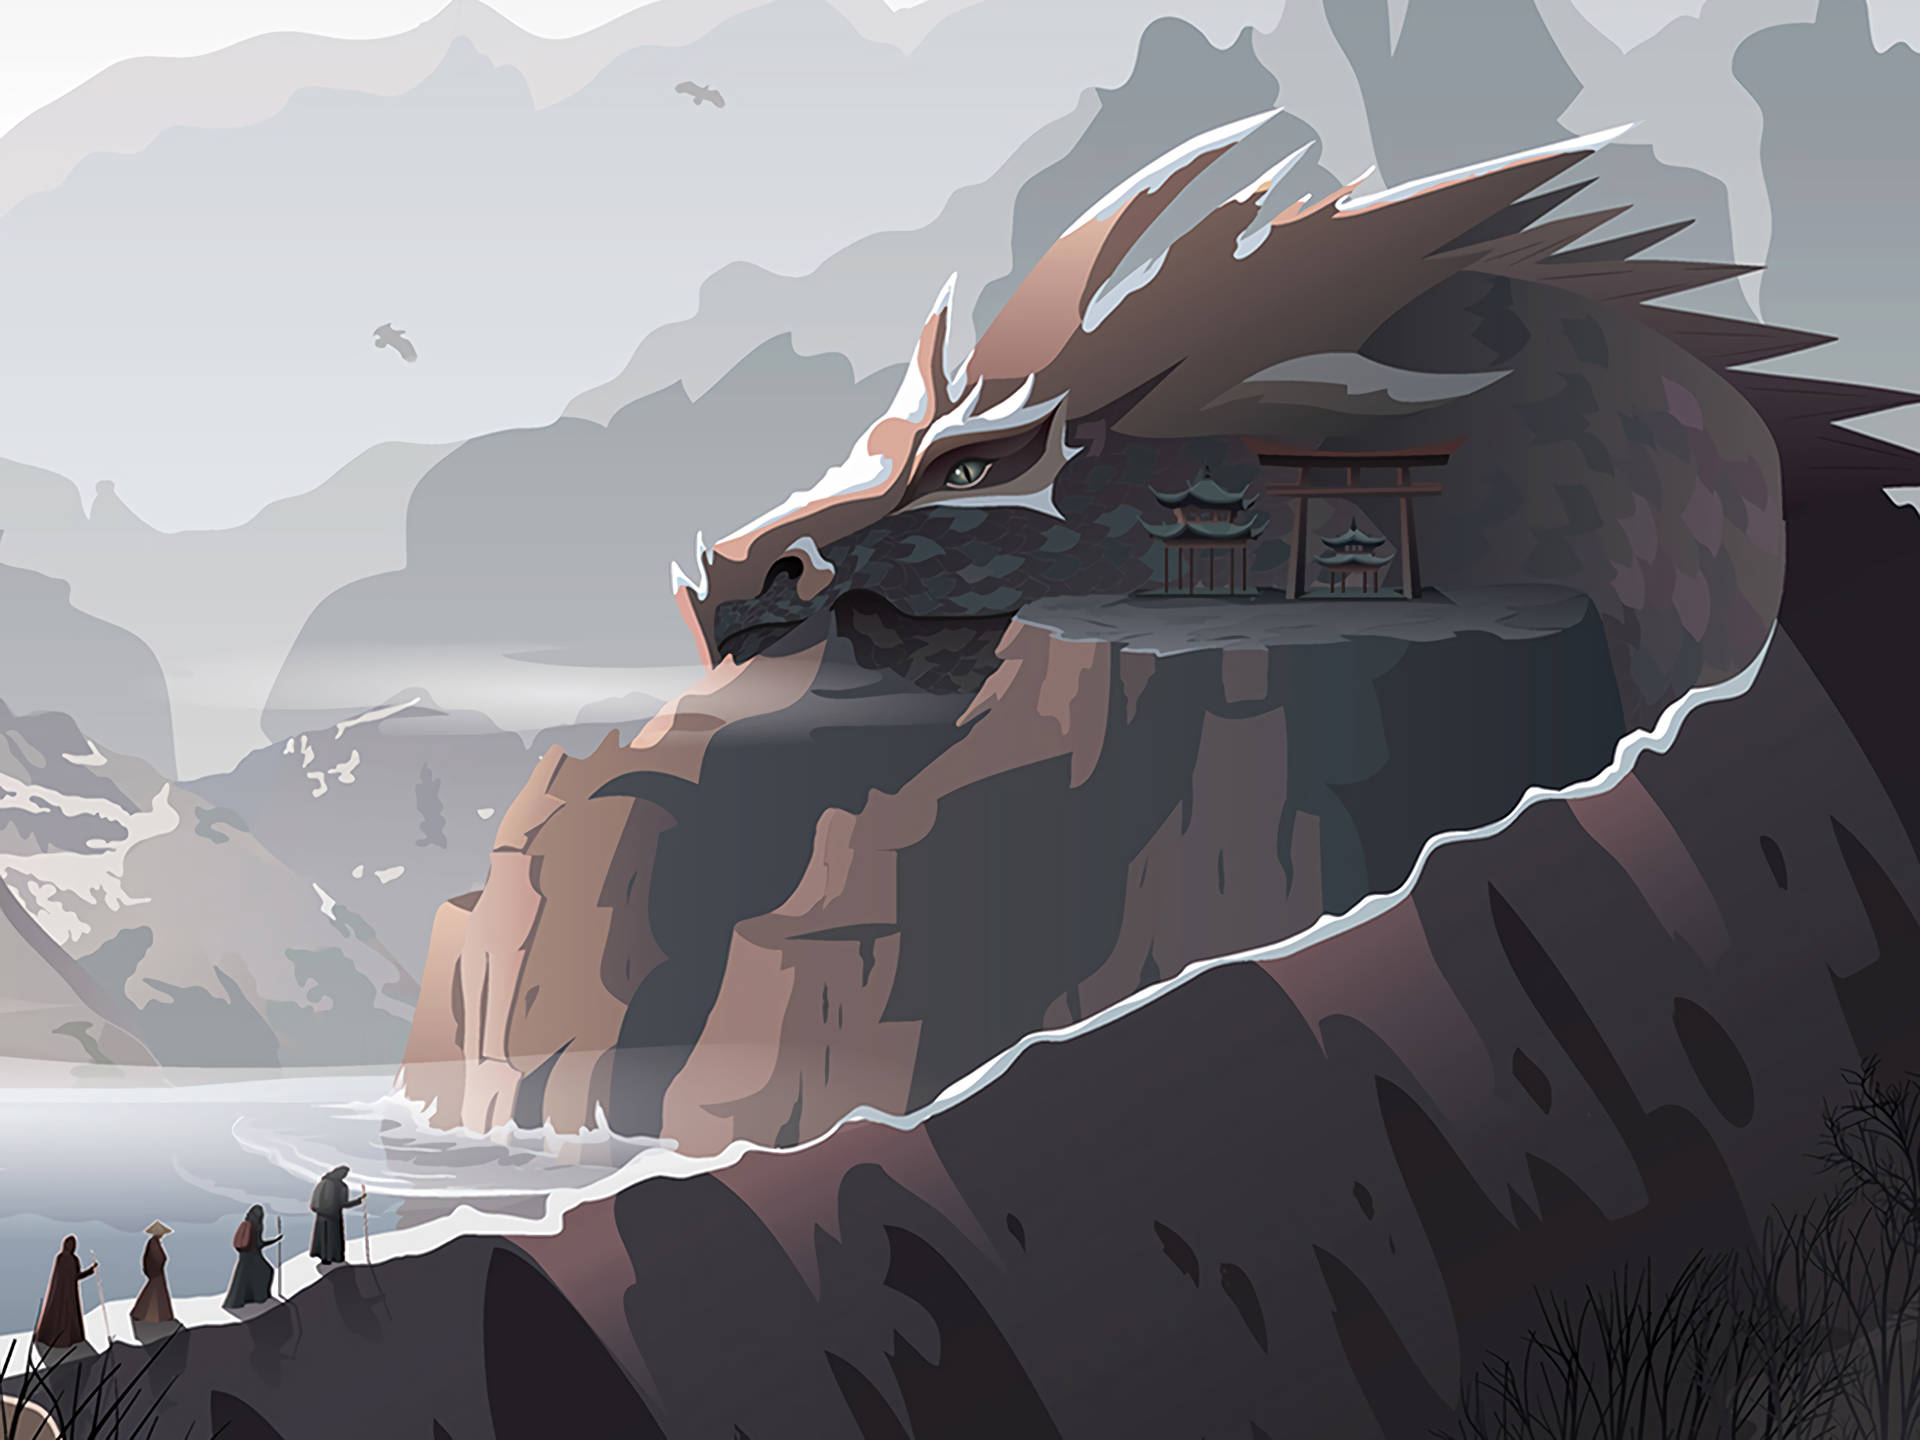 Mighty Dragon Crouching on a Giant Rock Wallpaper